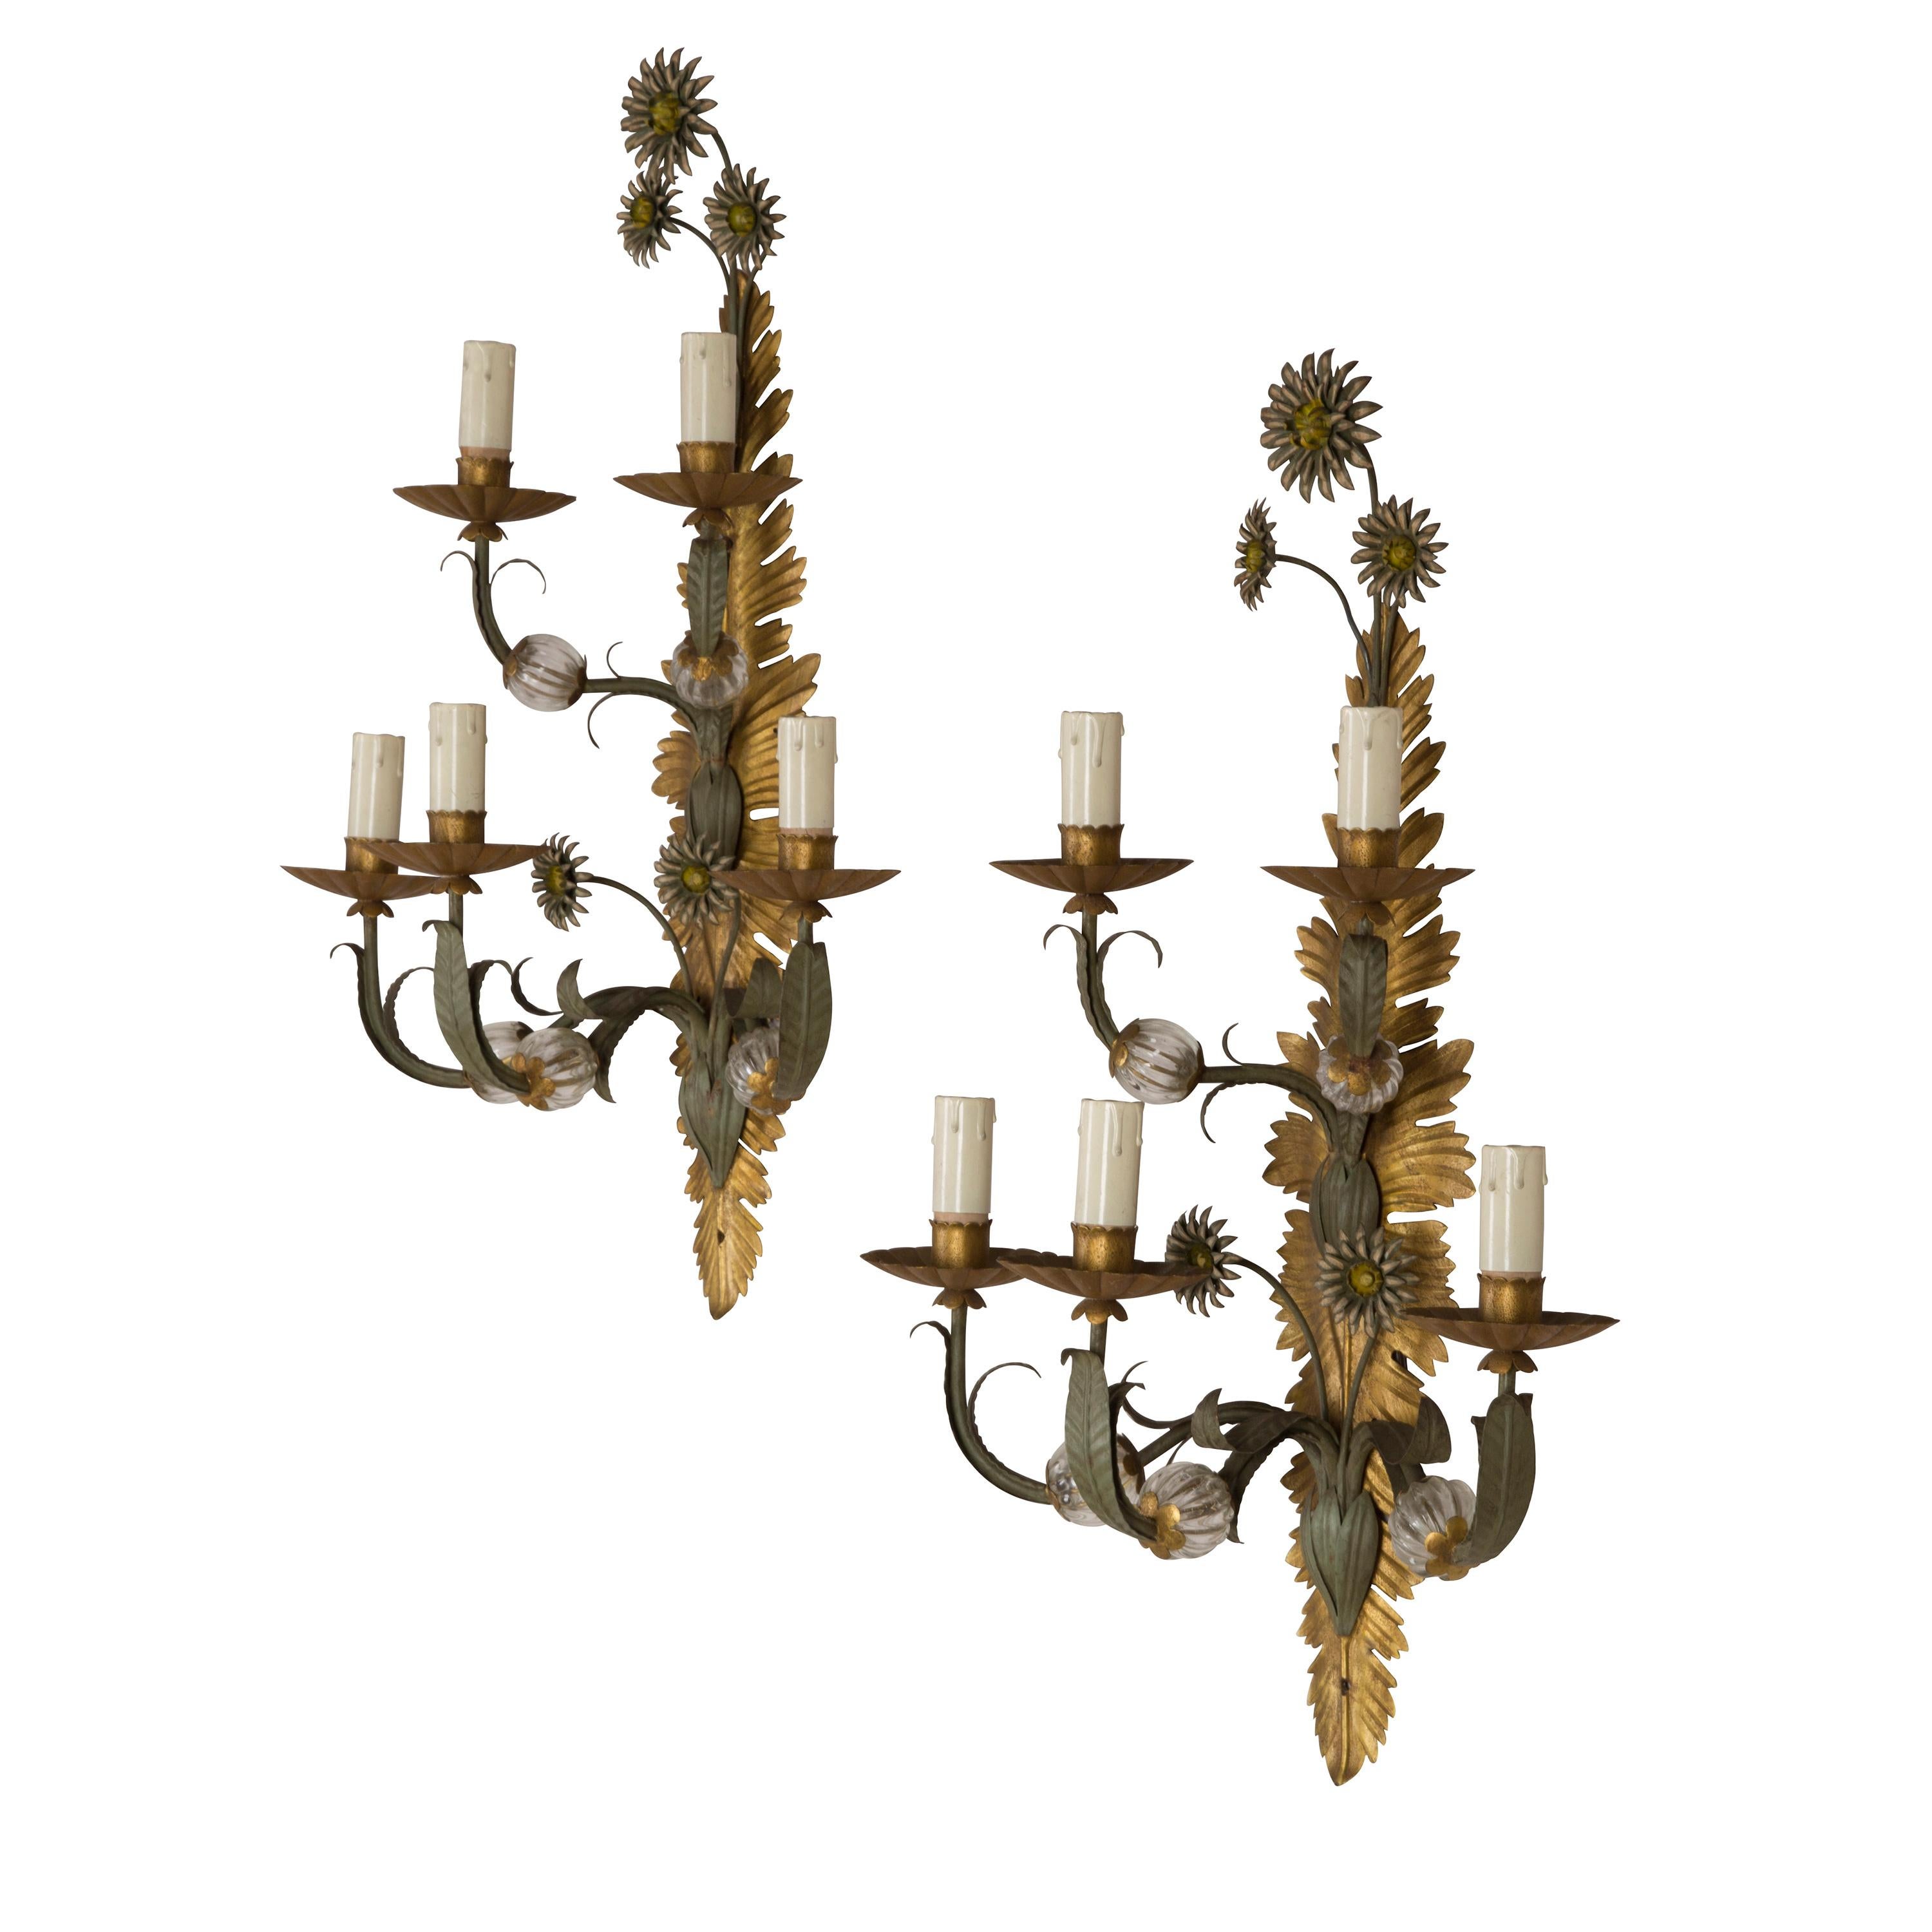 A very decorative pair of Italian, 1970s painted iron and glass 5-branch wall sconces.